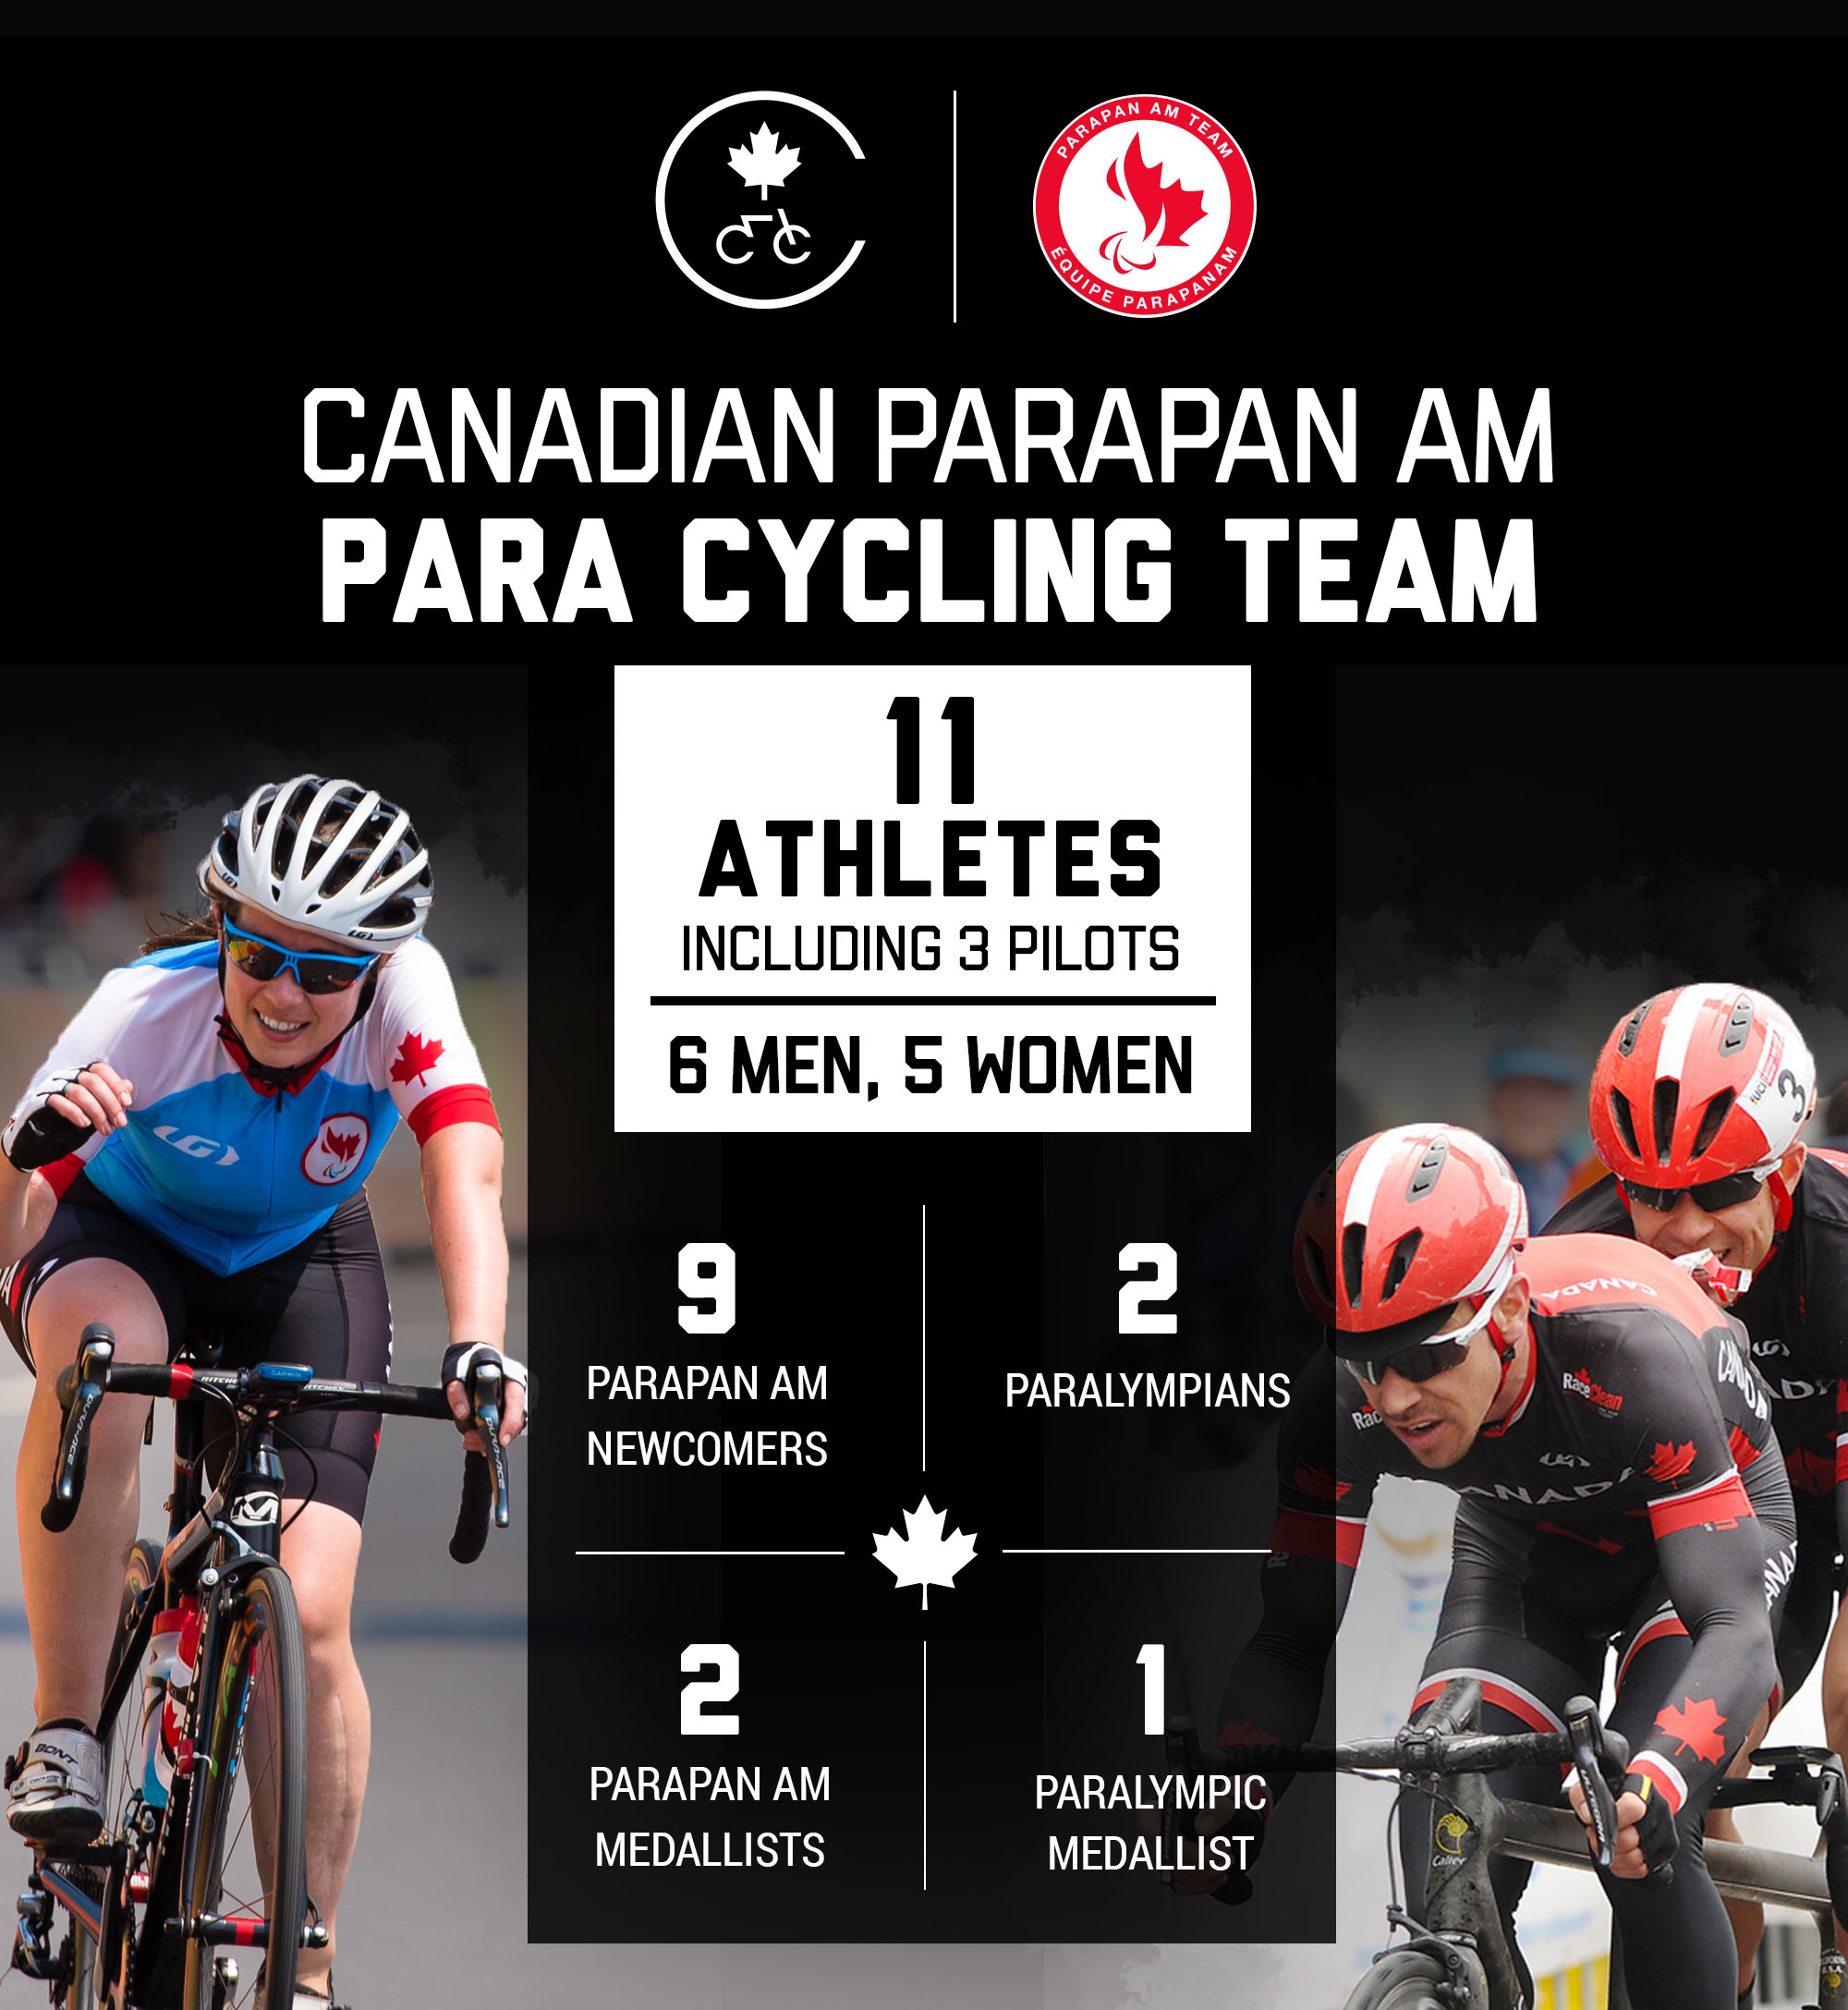 A graphic showing the make-up of the Canadian Parapan Am Para Cycling Team